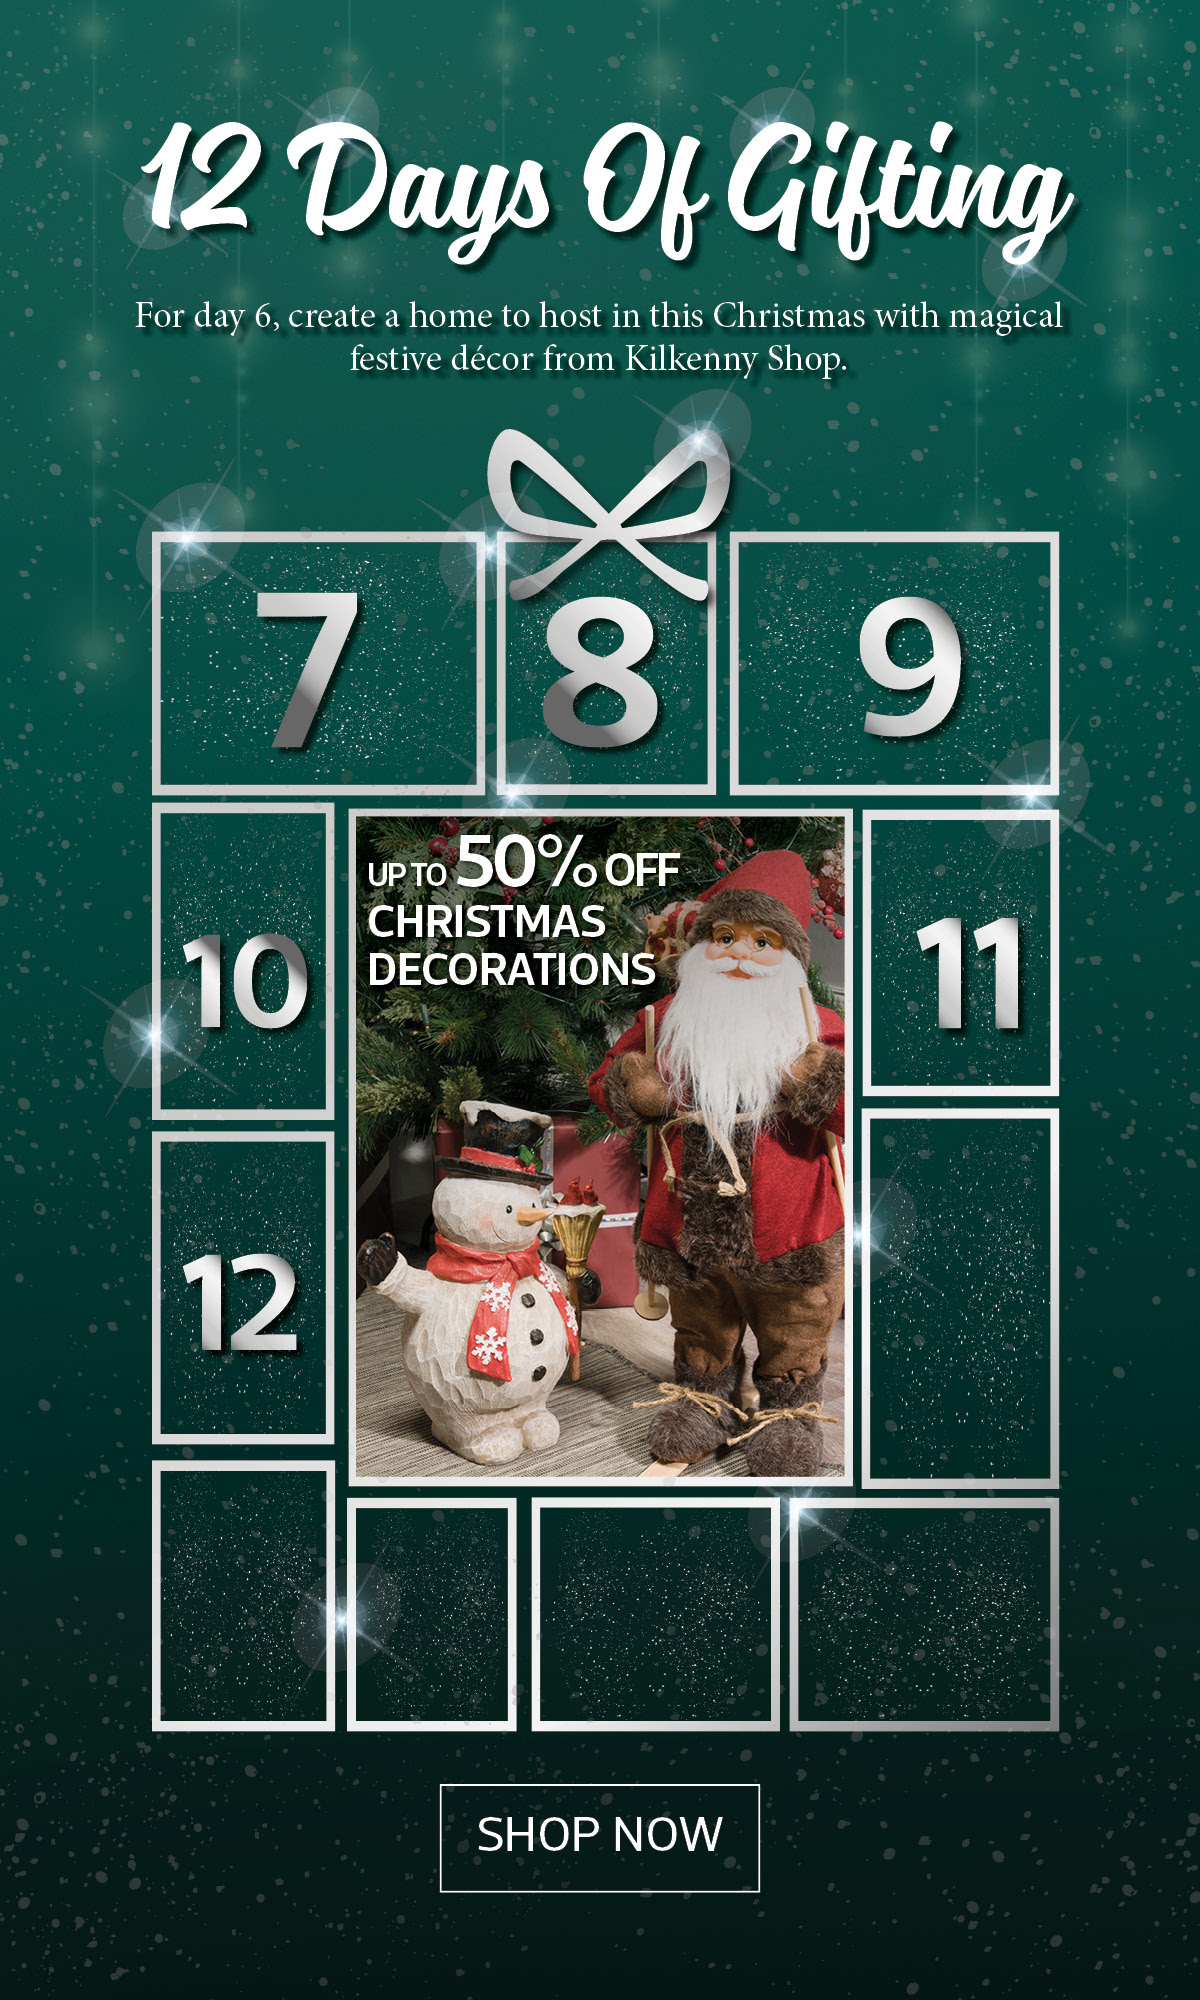 Kilkenny Shop - Up to 50% off! ALL Christmas decorations